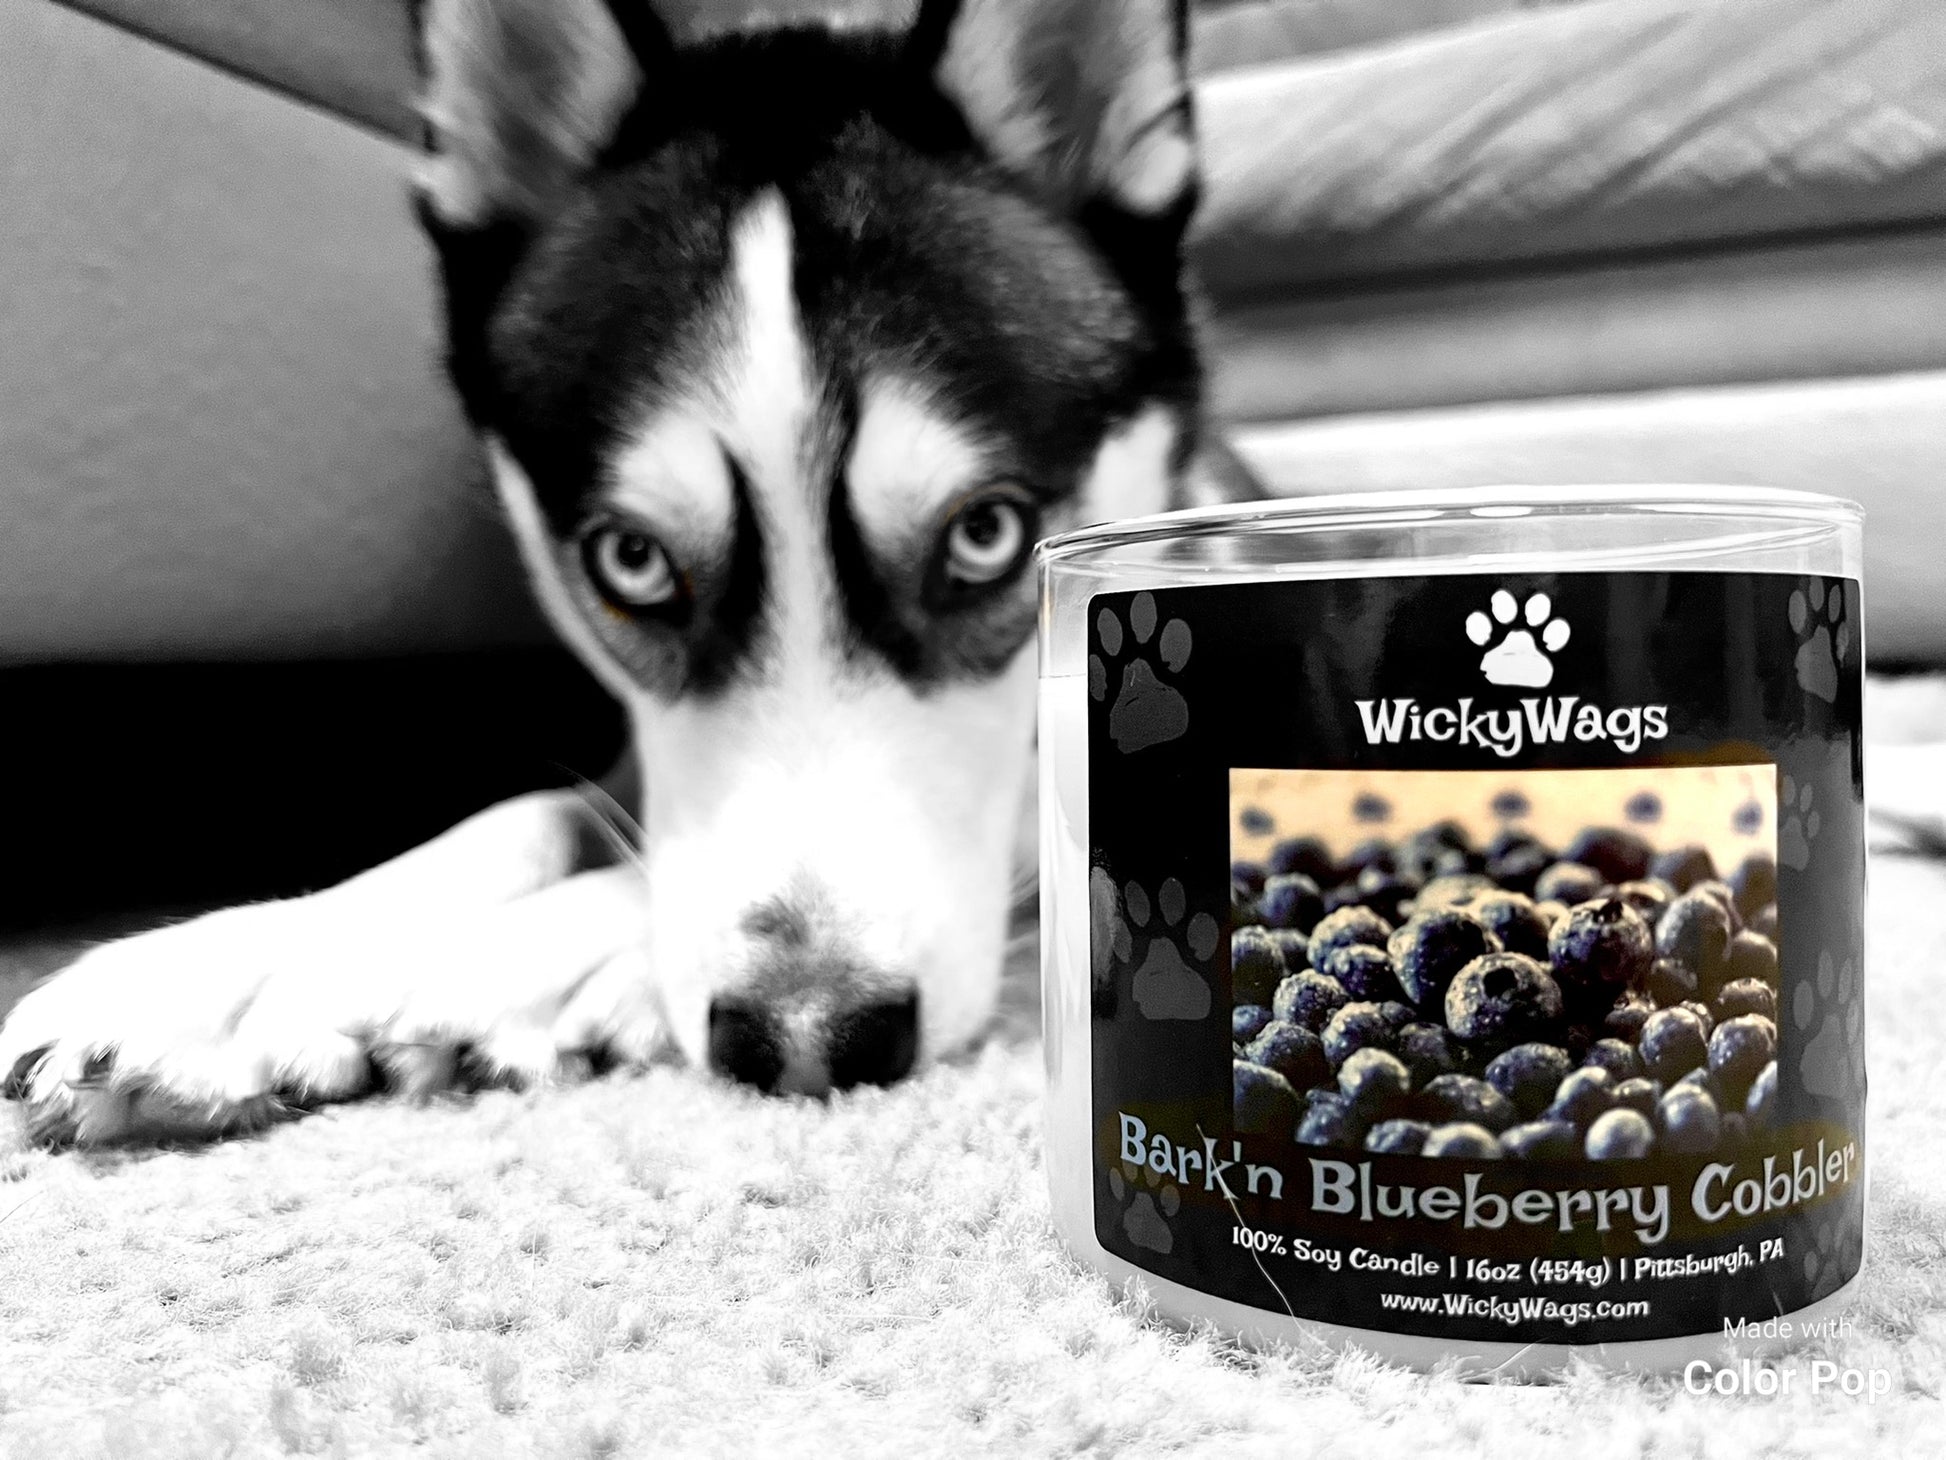 Husky next to pet friendly blueberry cobbler candle.